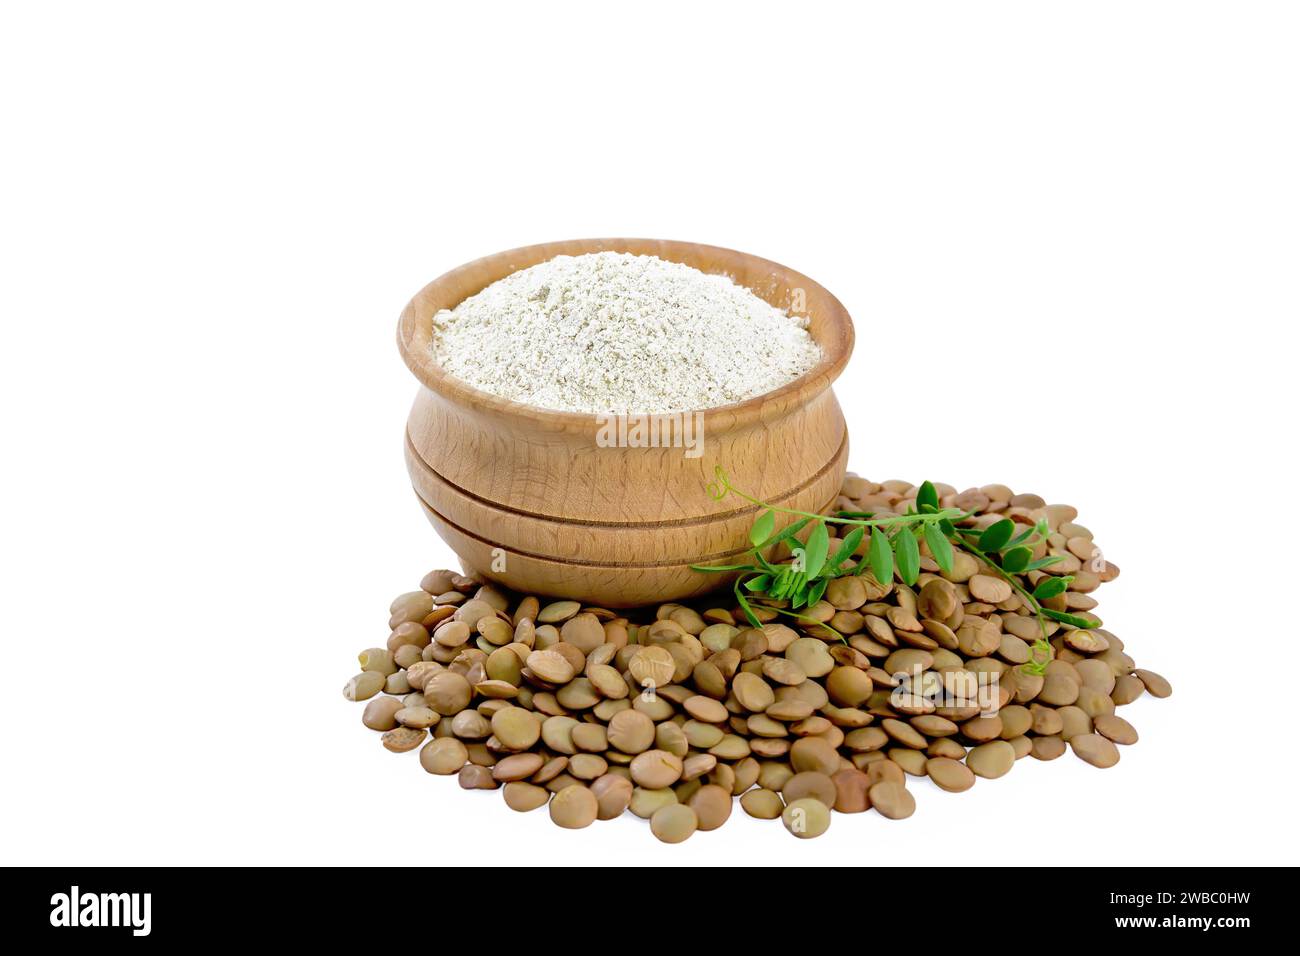 Lentil flour in bowl, stalk with lentil leaves and legume isolated on white background Stock Photo